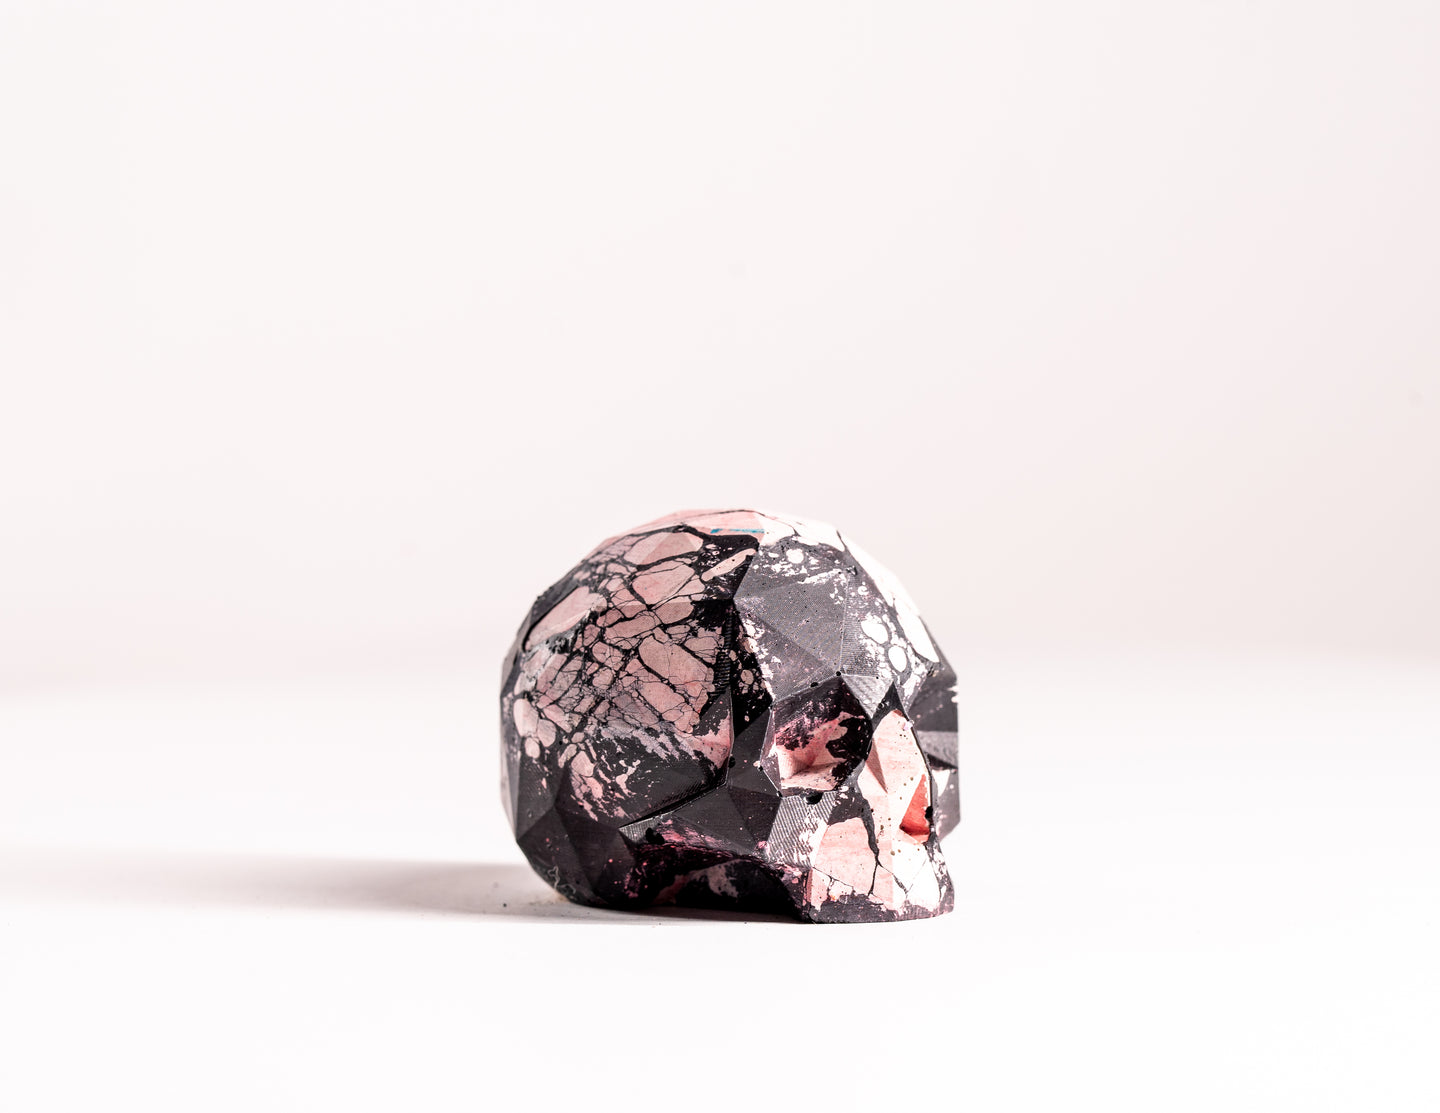 Mini Collectible Skull - Marbled - 134